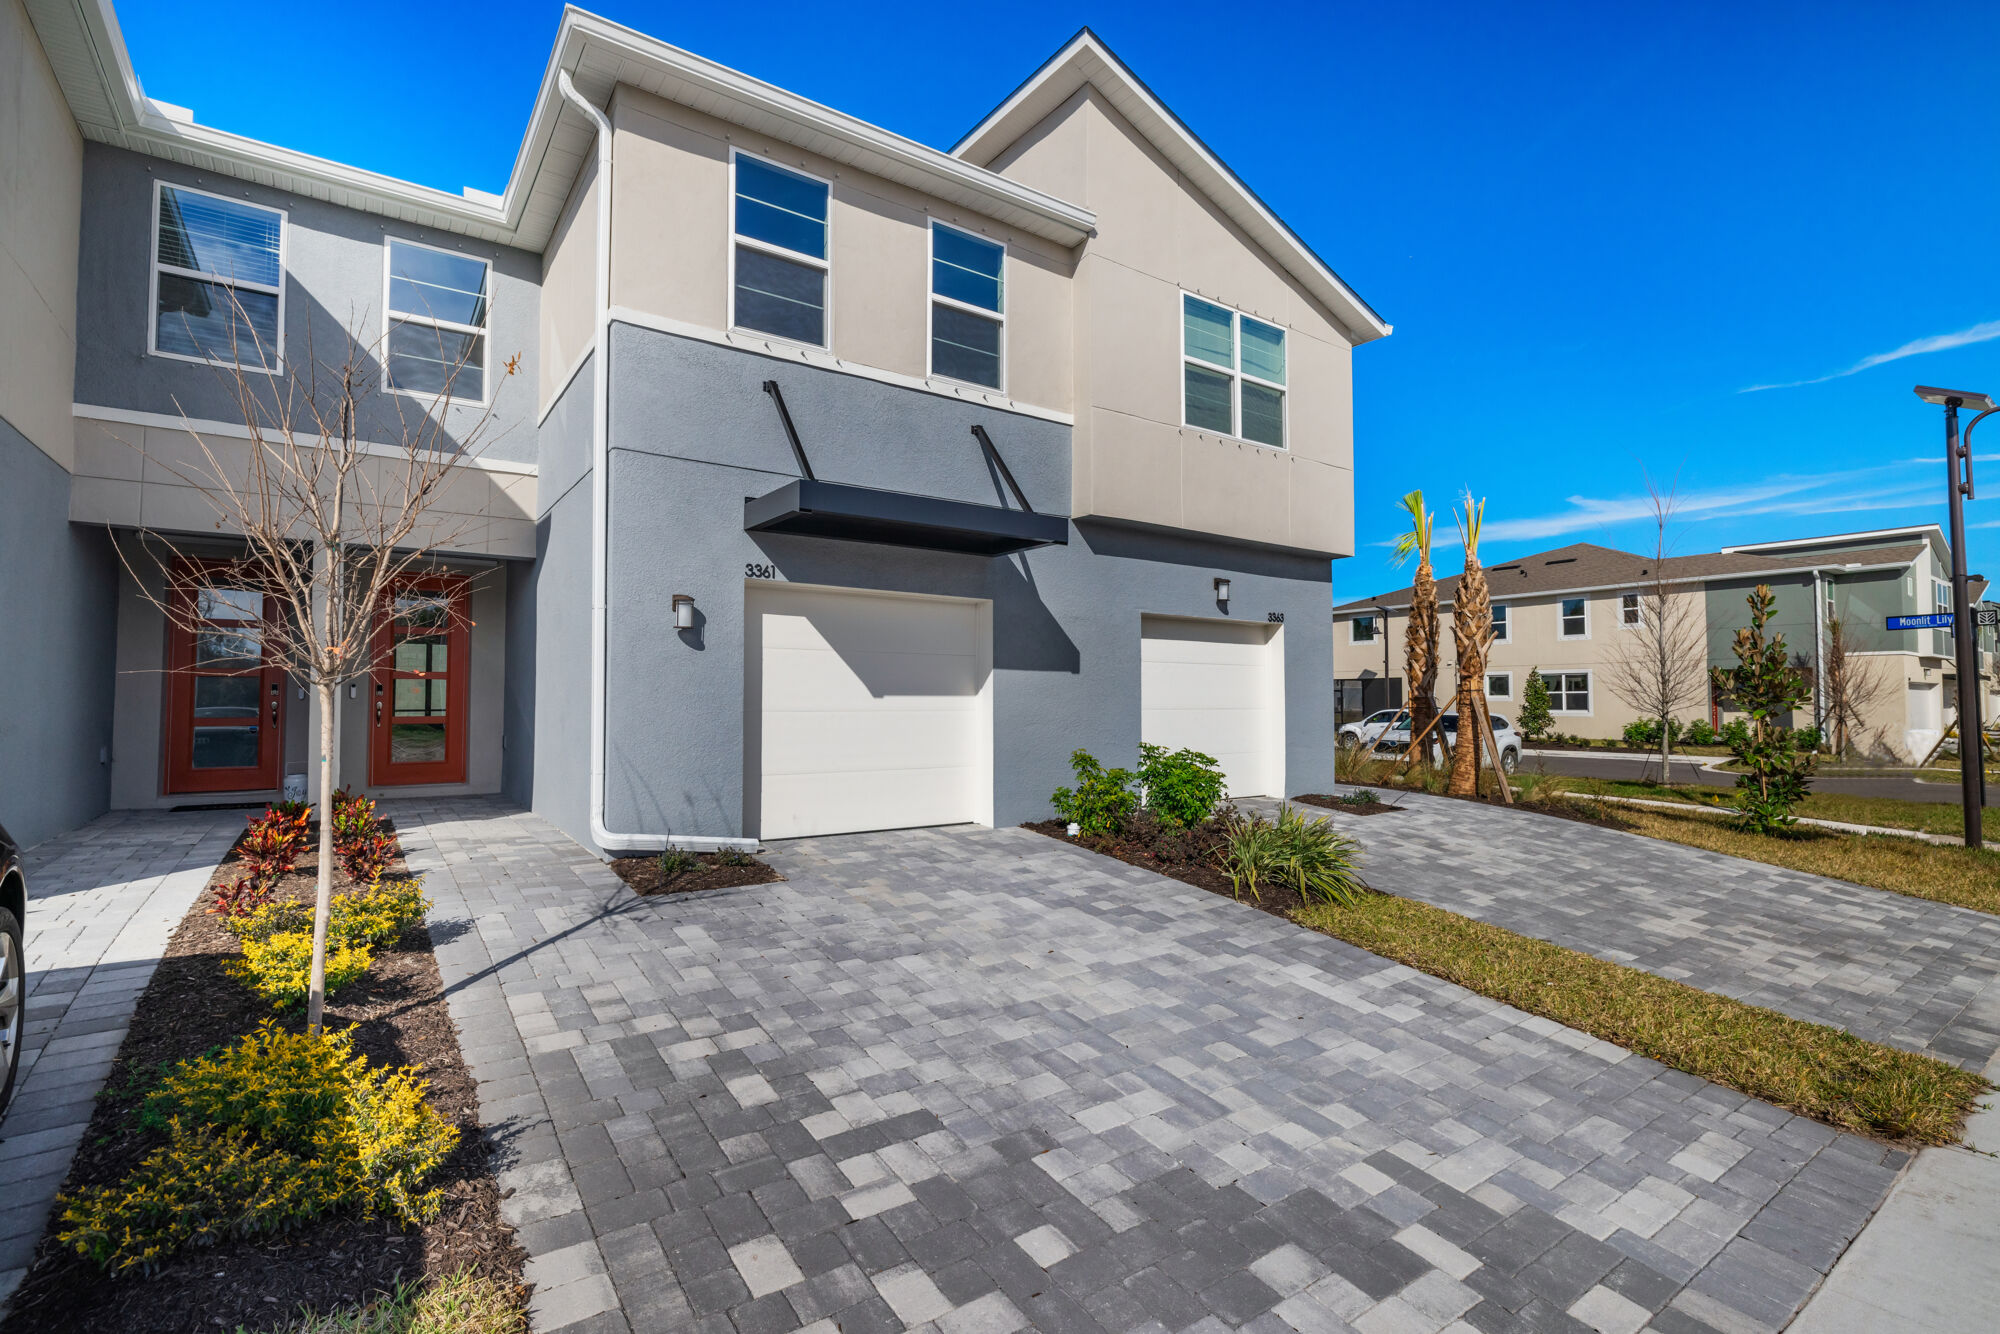 townhome, 3 bedroom, 2.5 baths, contemporary exterior, loft, open concept, walk-in closet, powder room, plank style tile flooring, gated community